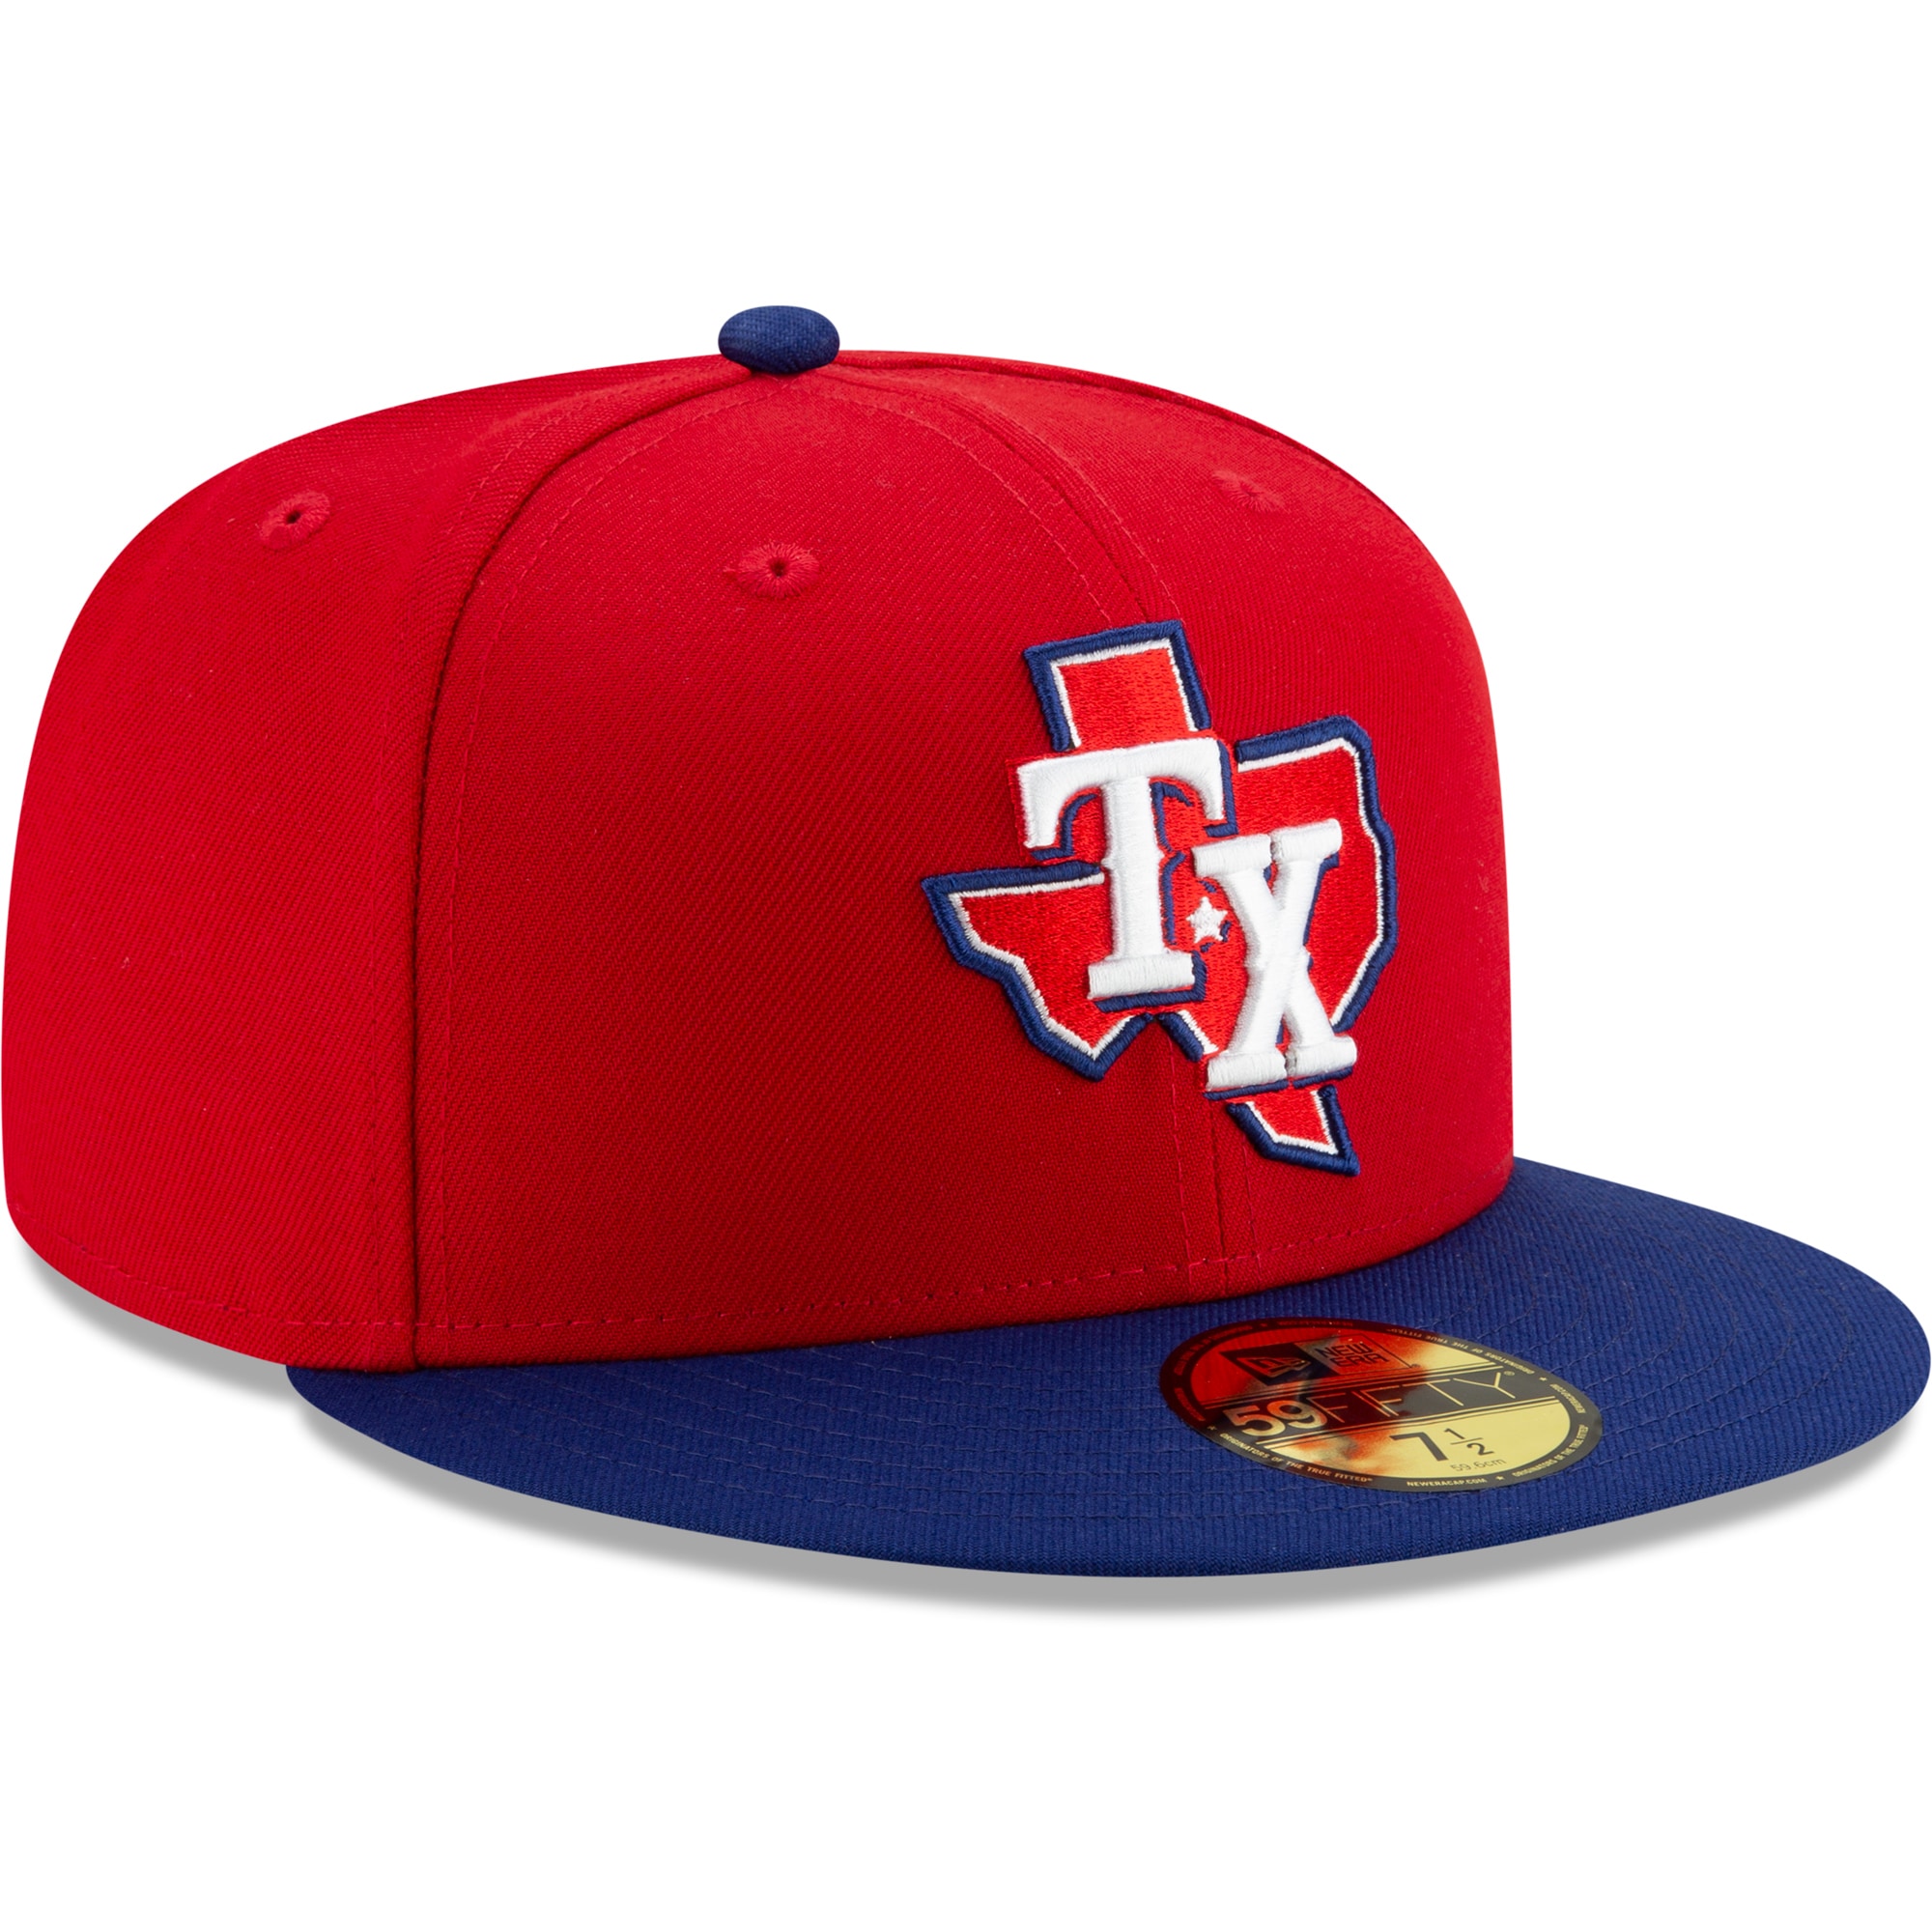 Men's New Era Red/Royal Texas Rangers 2020 Alternate 3 Authentic Collection On Field 59FIFTY Fitted Hat - image 3 of 4